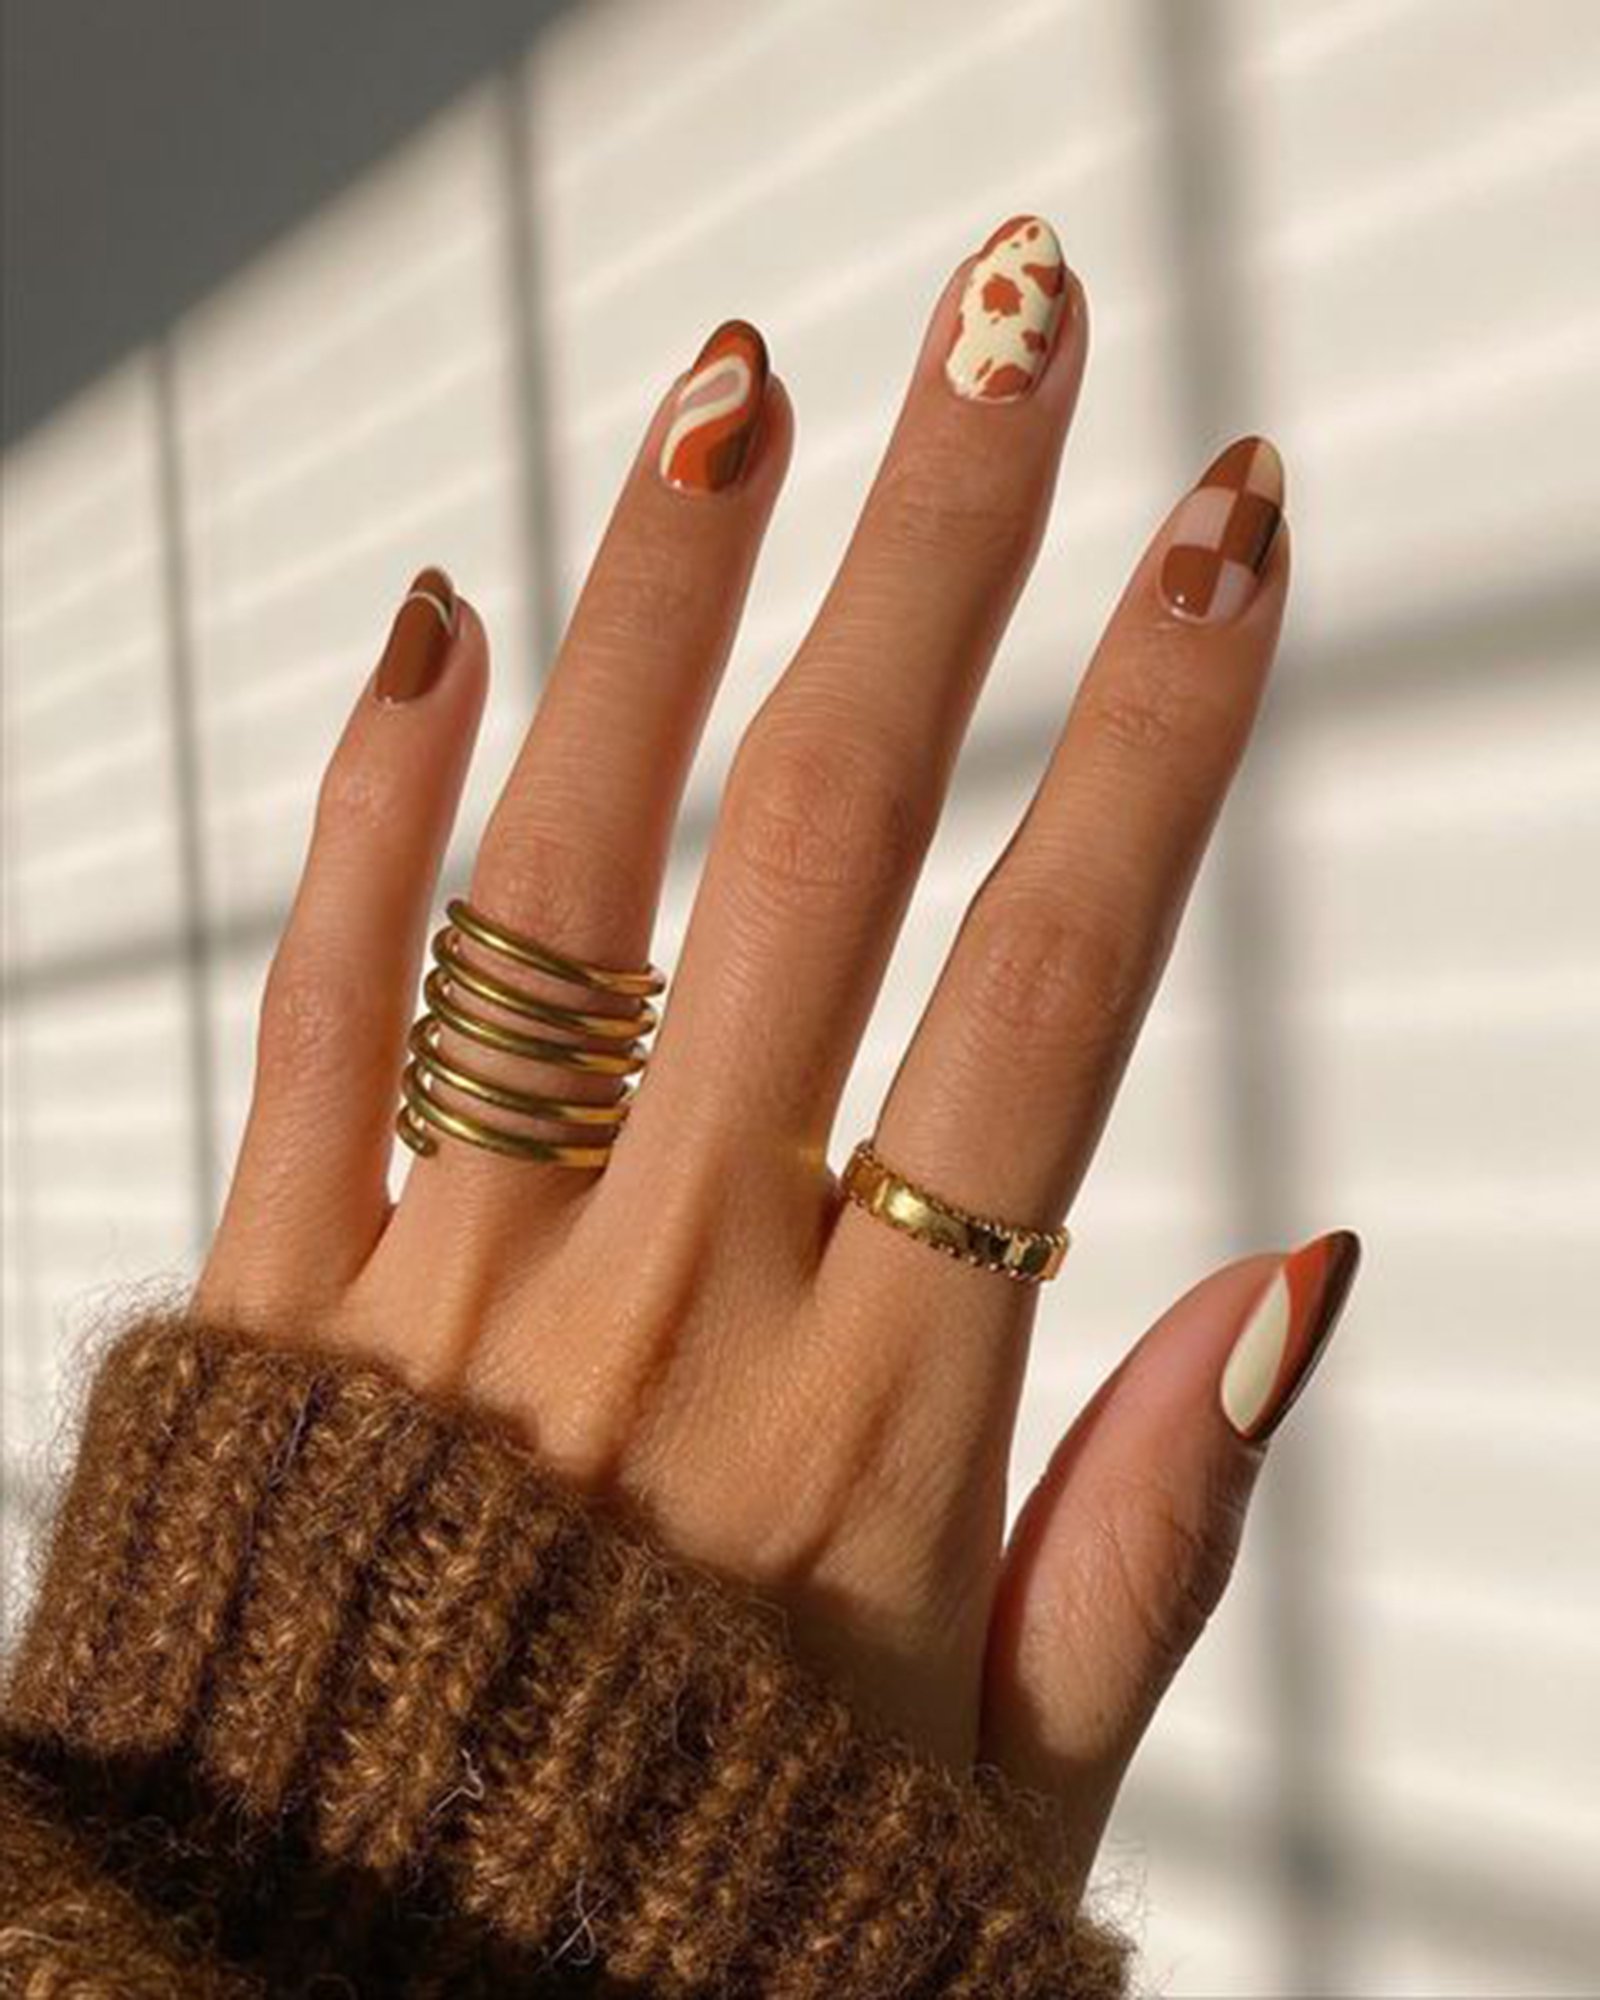 10 Beautiful Nail Designs To Wear This Fall - Wonder Forest